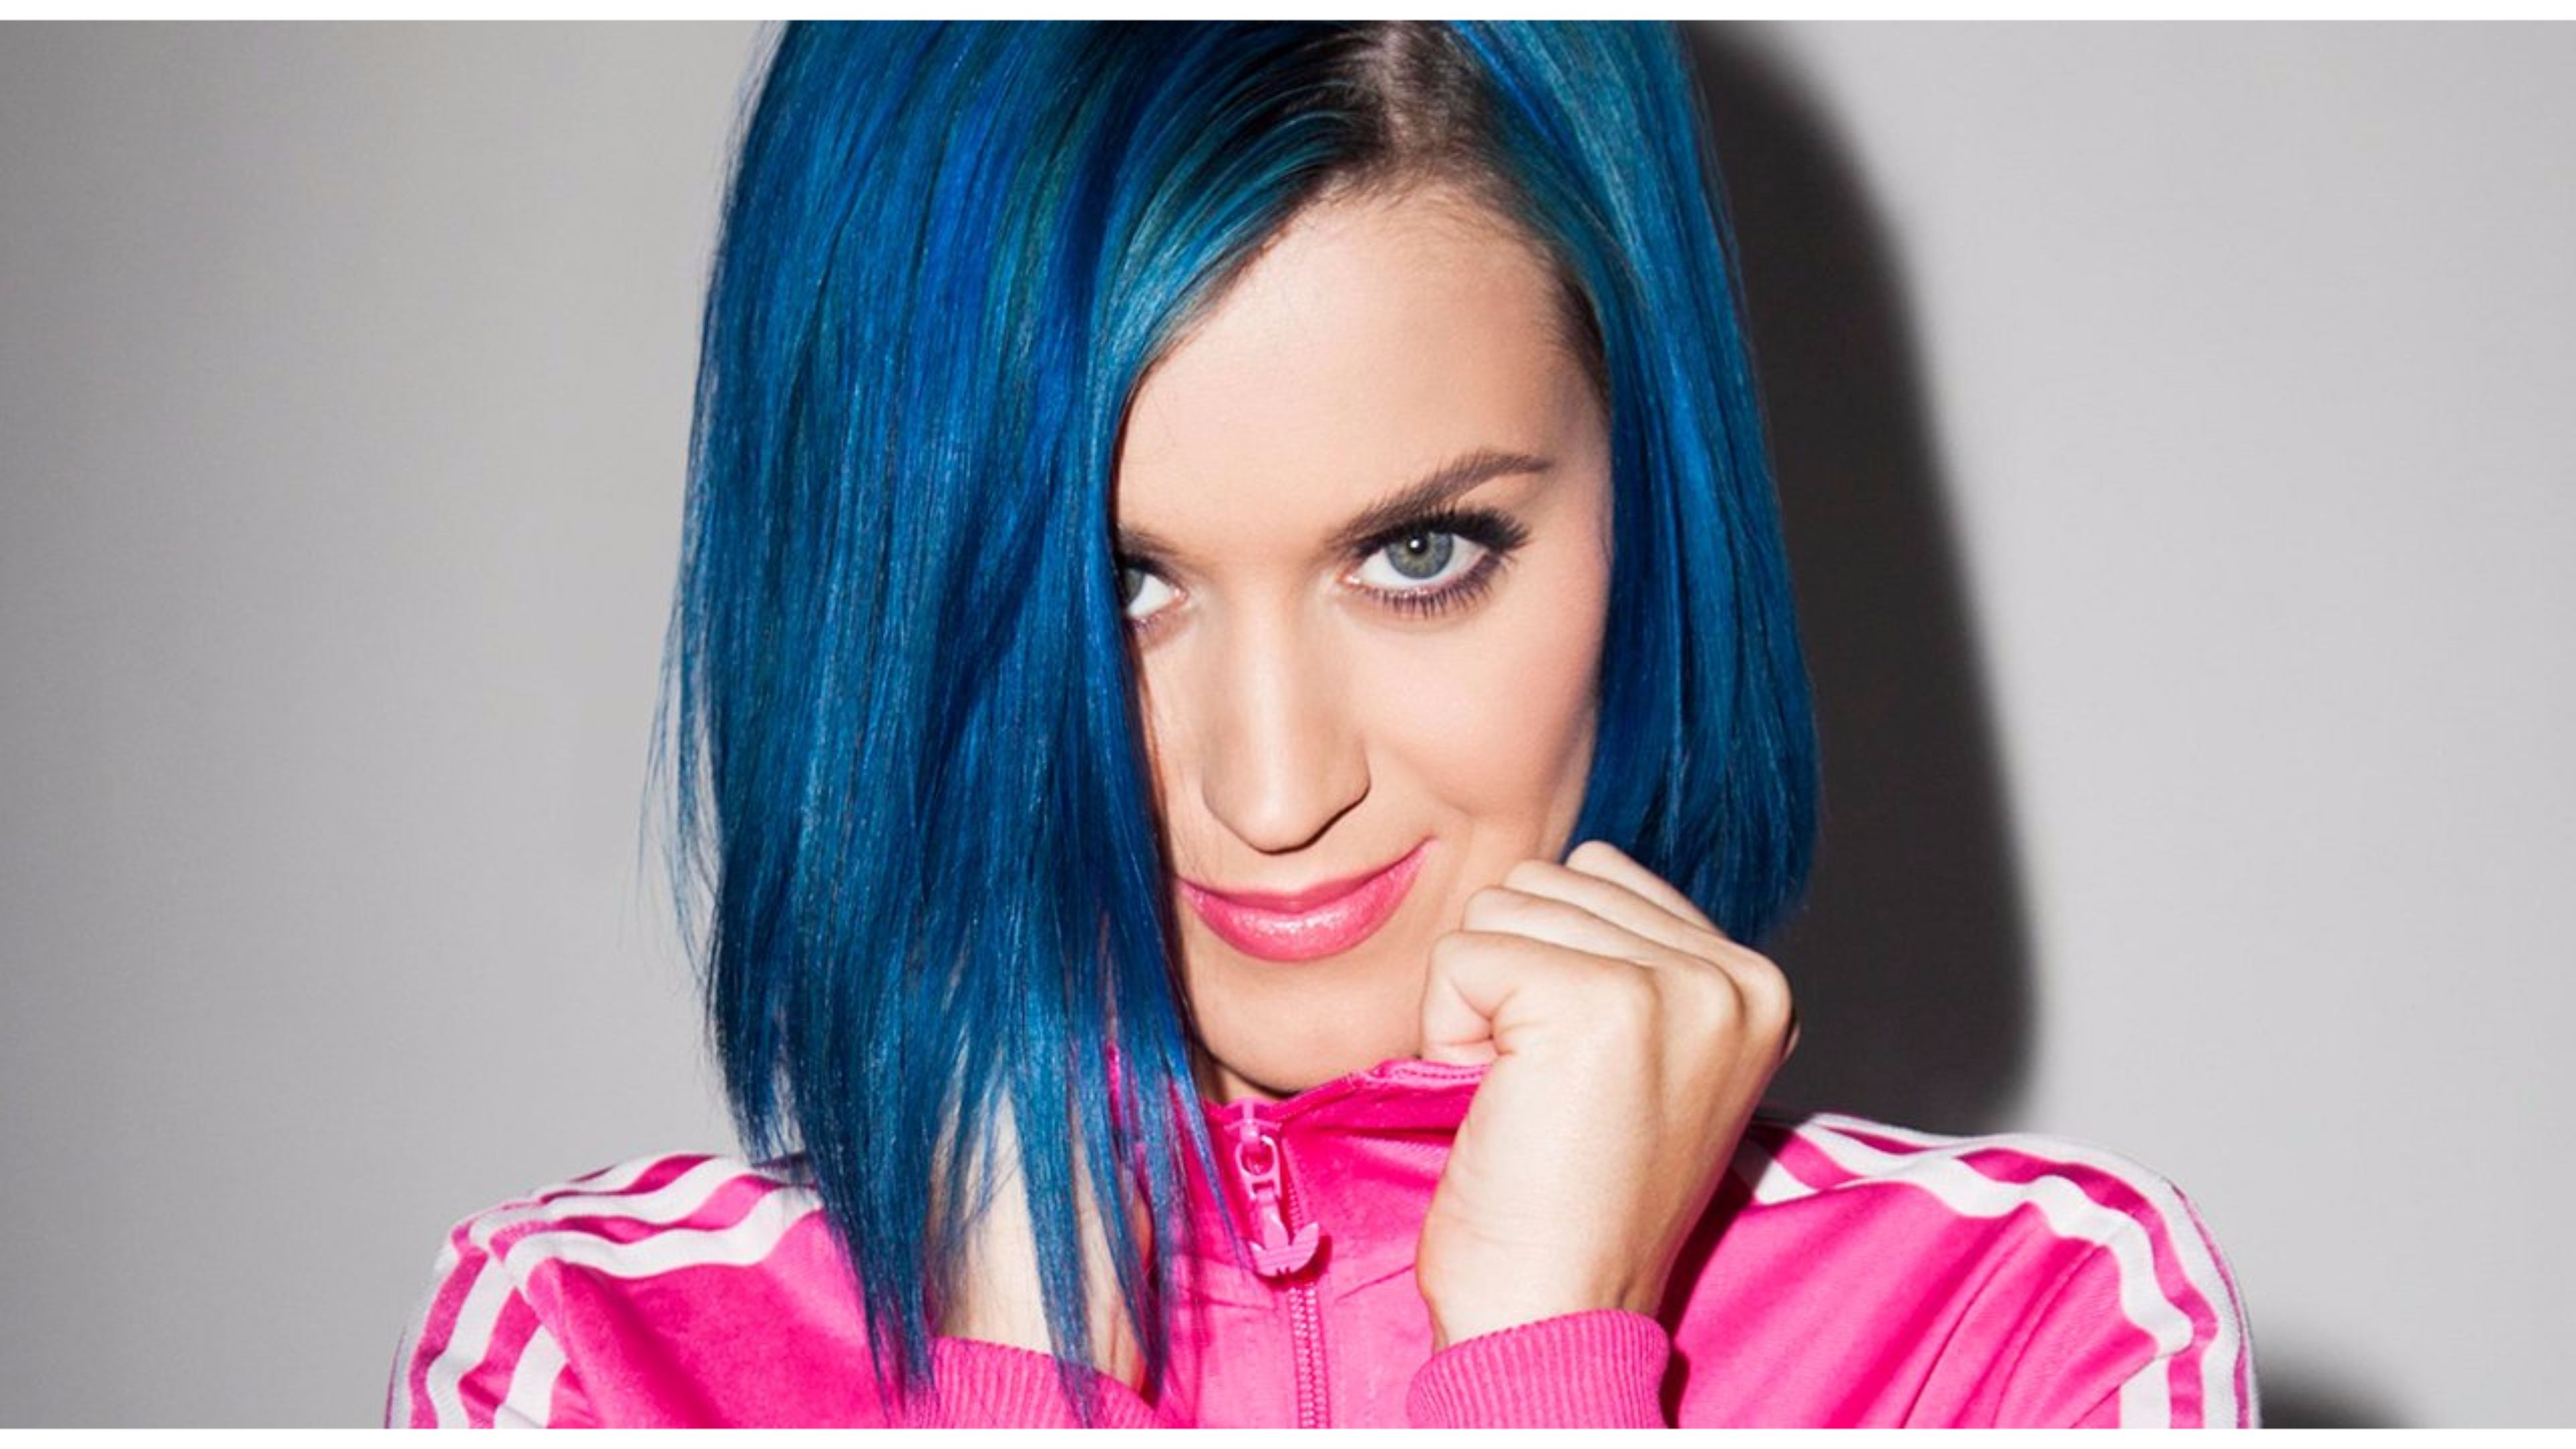 Katy Perry latest images Wallpapers